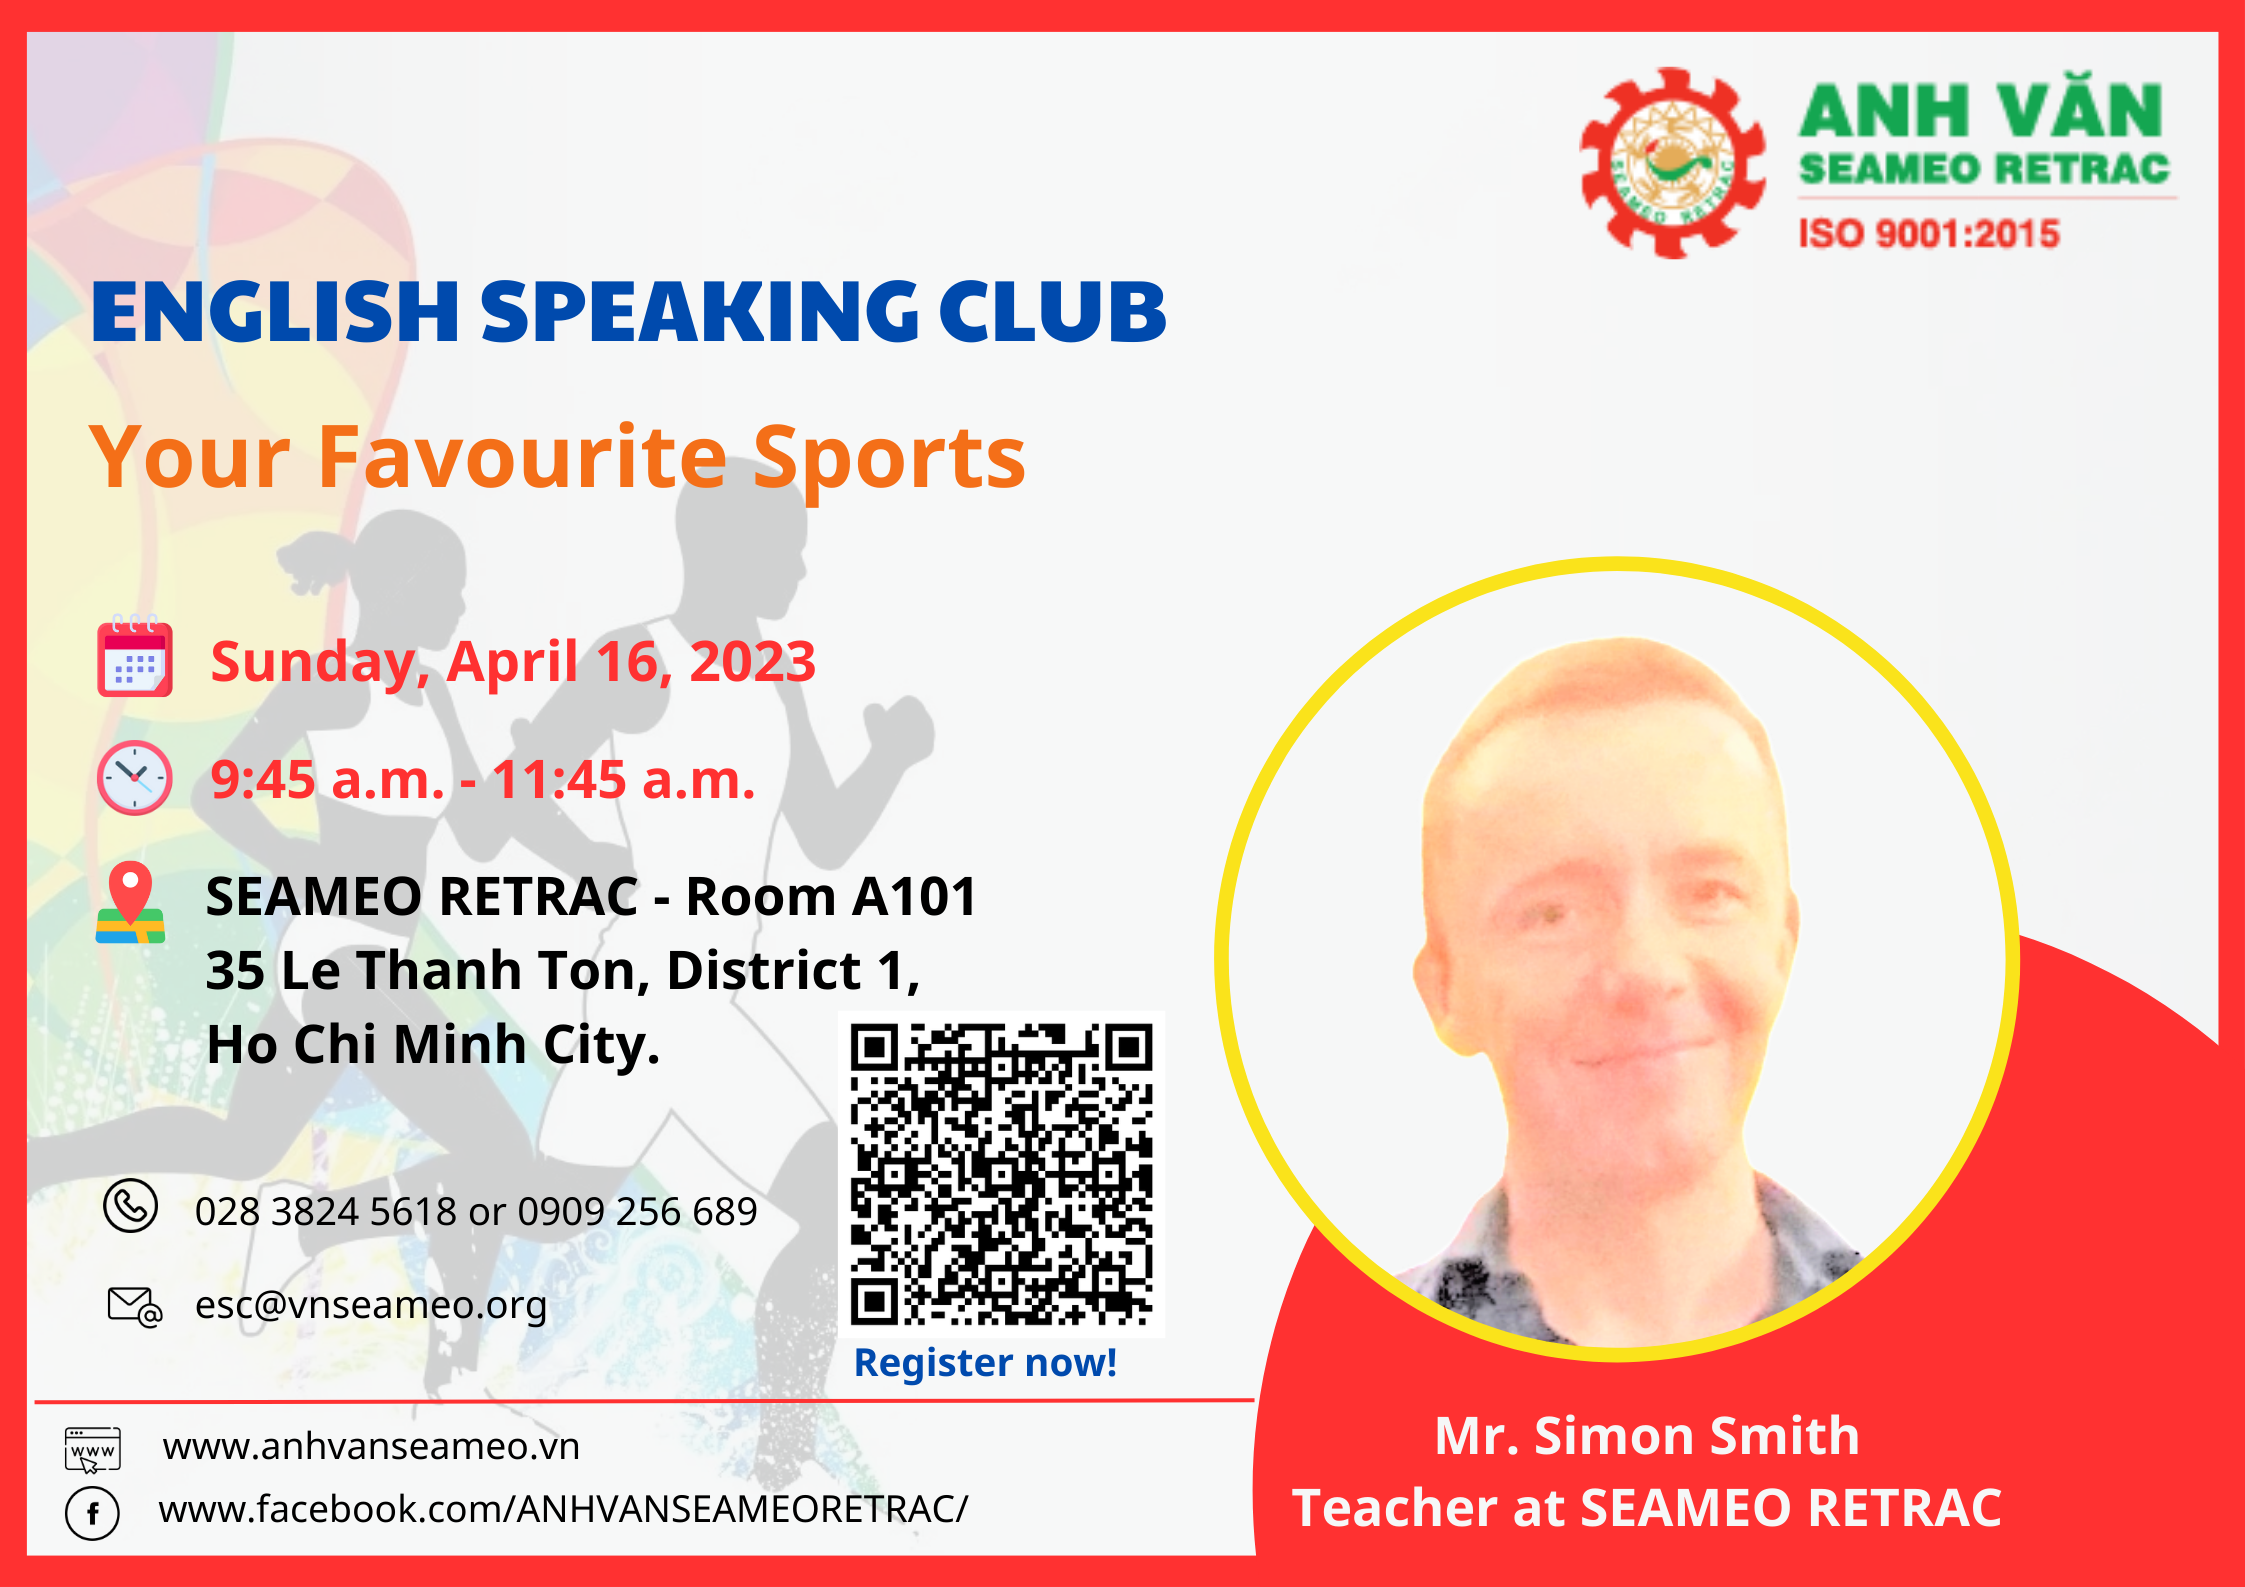 English Speaking Club titled “Your Favorite Sports”